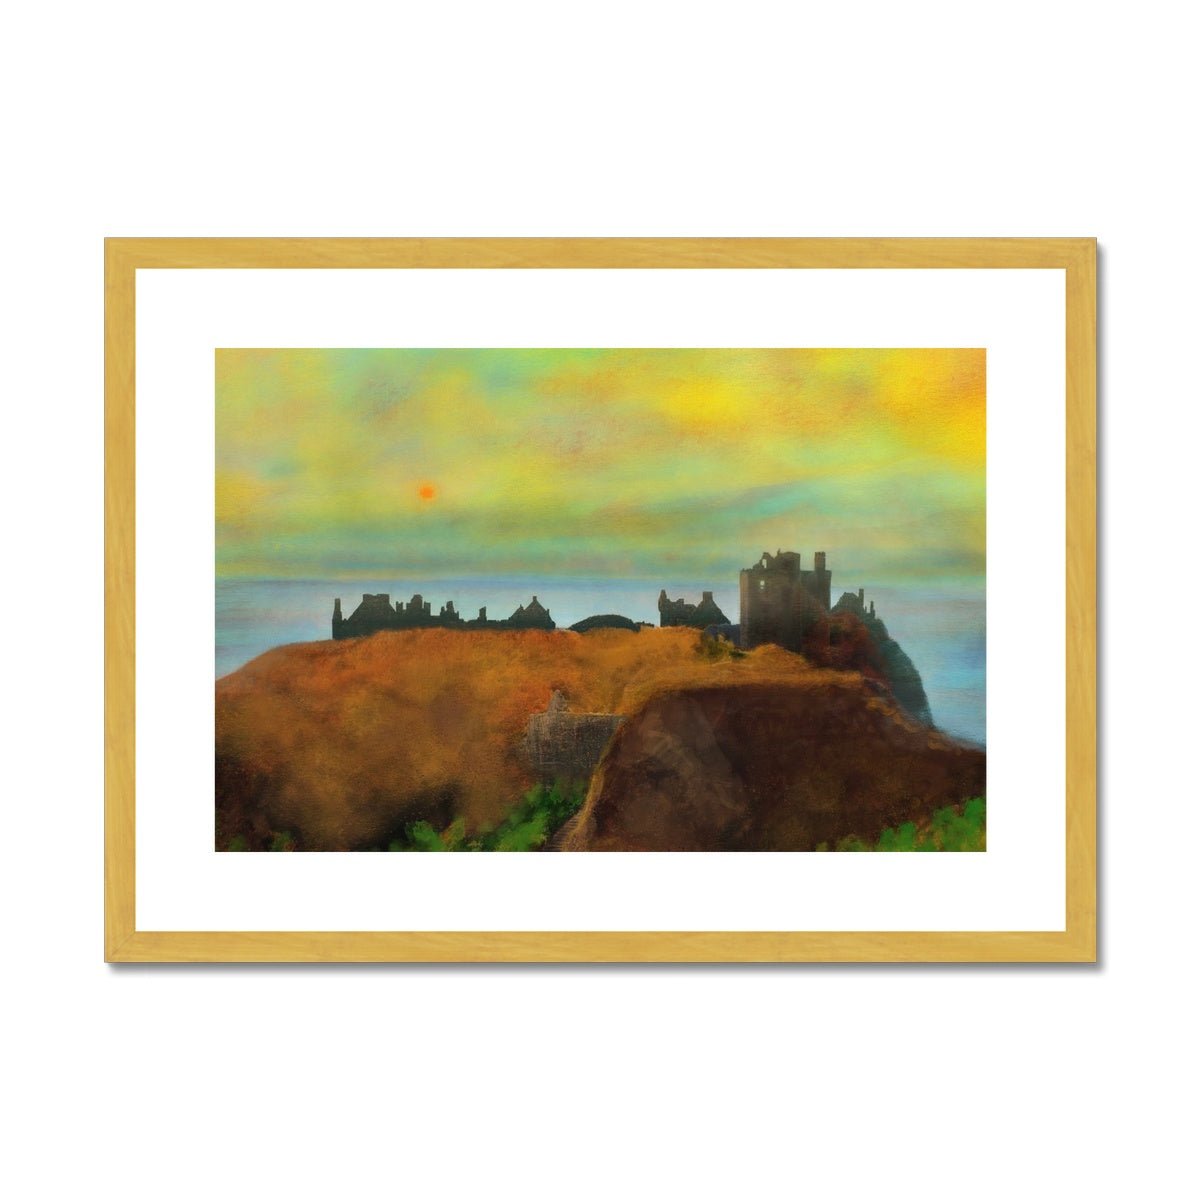 Dunnottar Castle Dusk Painting | Antique Framed & Mounted Prints From Scotland-Antique Framed & Mounted Prints-Historic & Iconic Scotland Art Gallery-A2 Landscape-Gold Frame-Paintings, Prints, Homeware, Art Gifts From Scotland By Scottish Artist Kevin Hunter